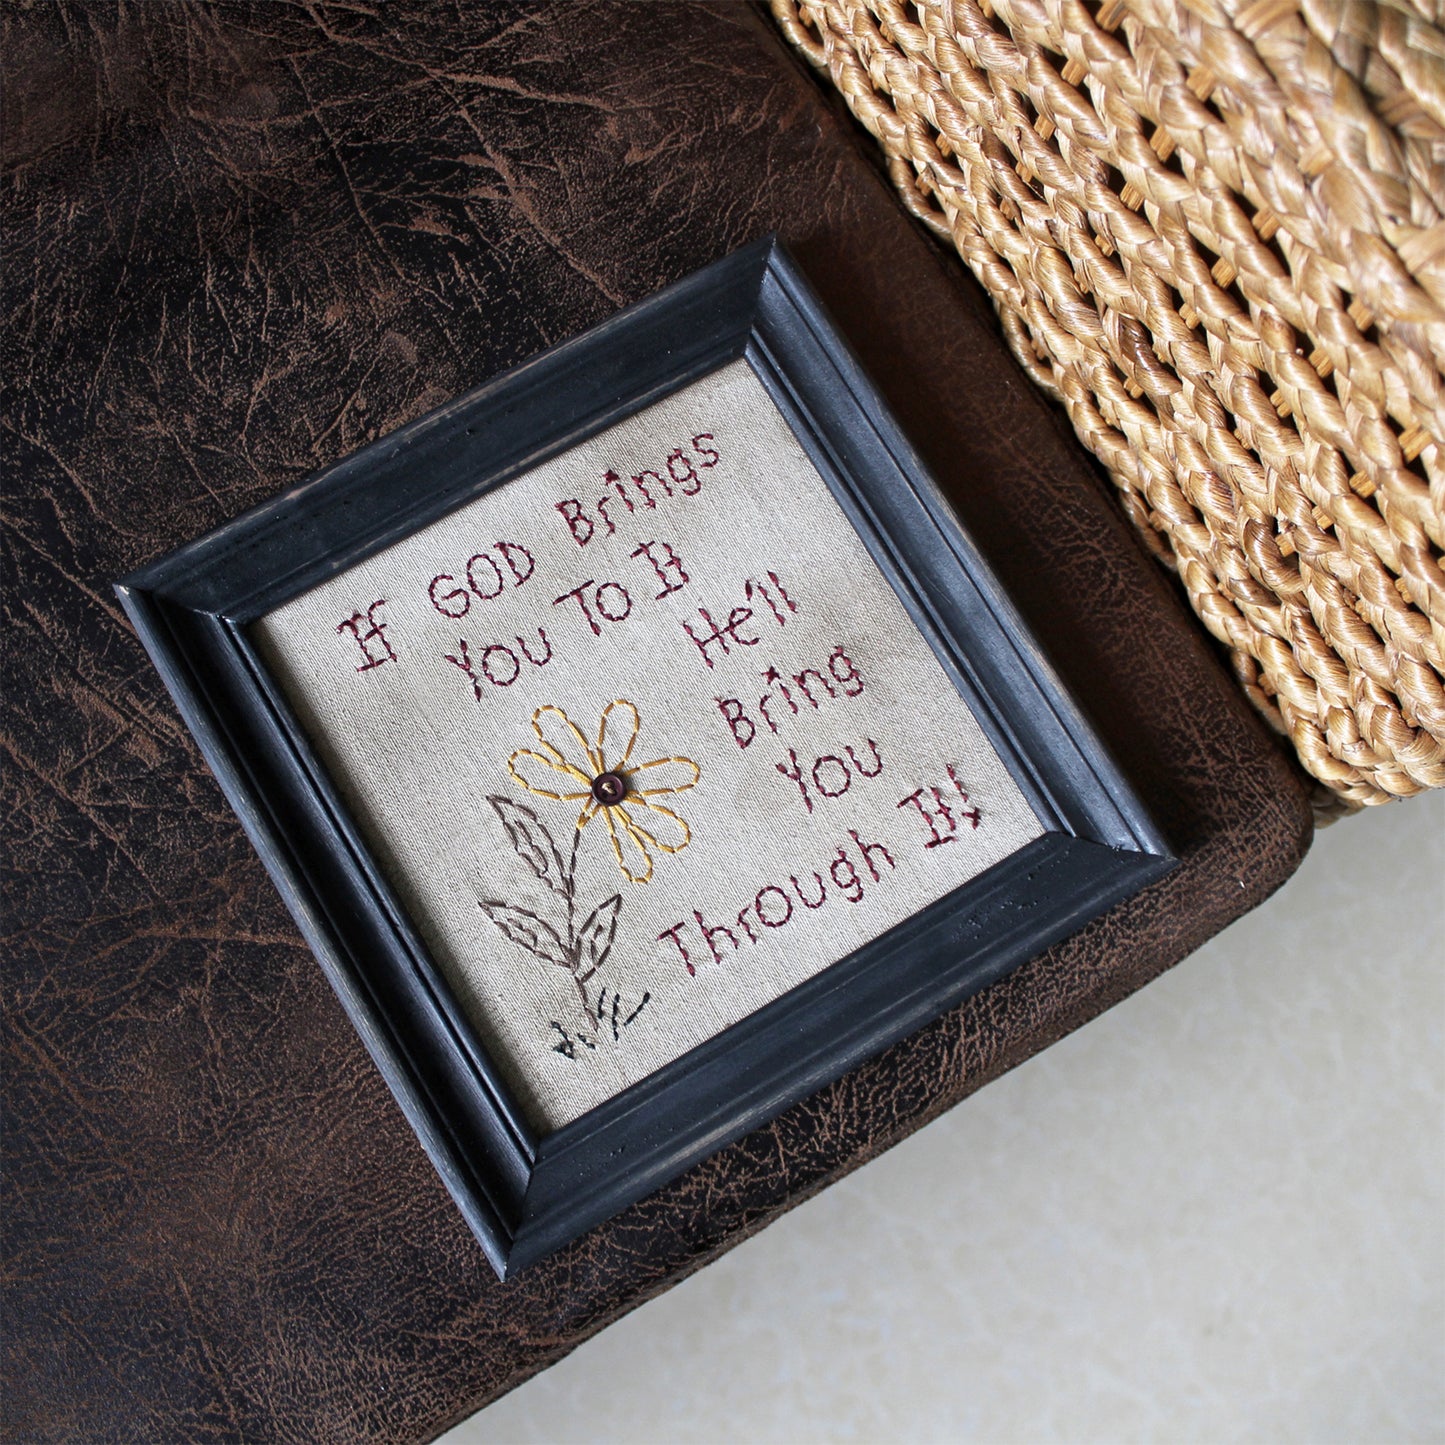 CVHOMEDECO. Primitives Antique If God Brings You to It, He 'll Bring You Through It Stitchery Frame Wall Mounted Hanging Decor Art, 8 x 8 Inch